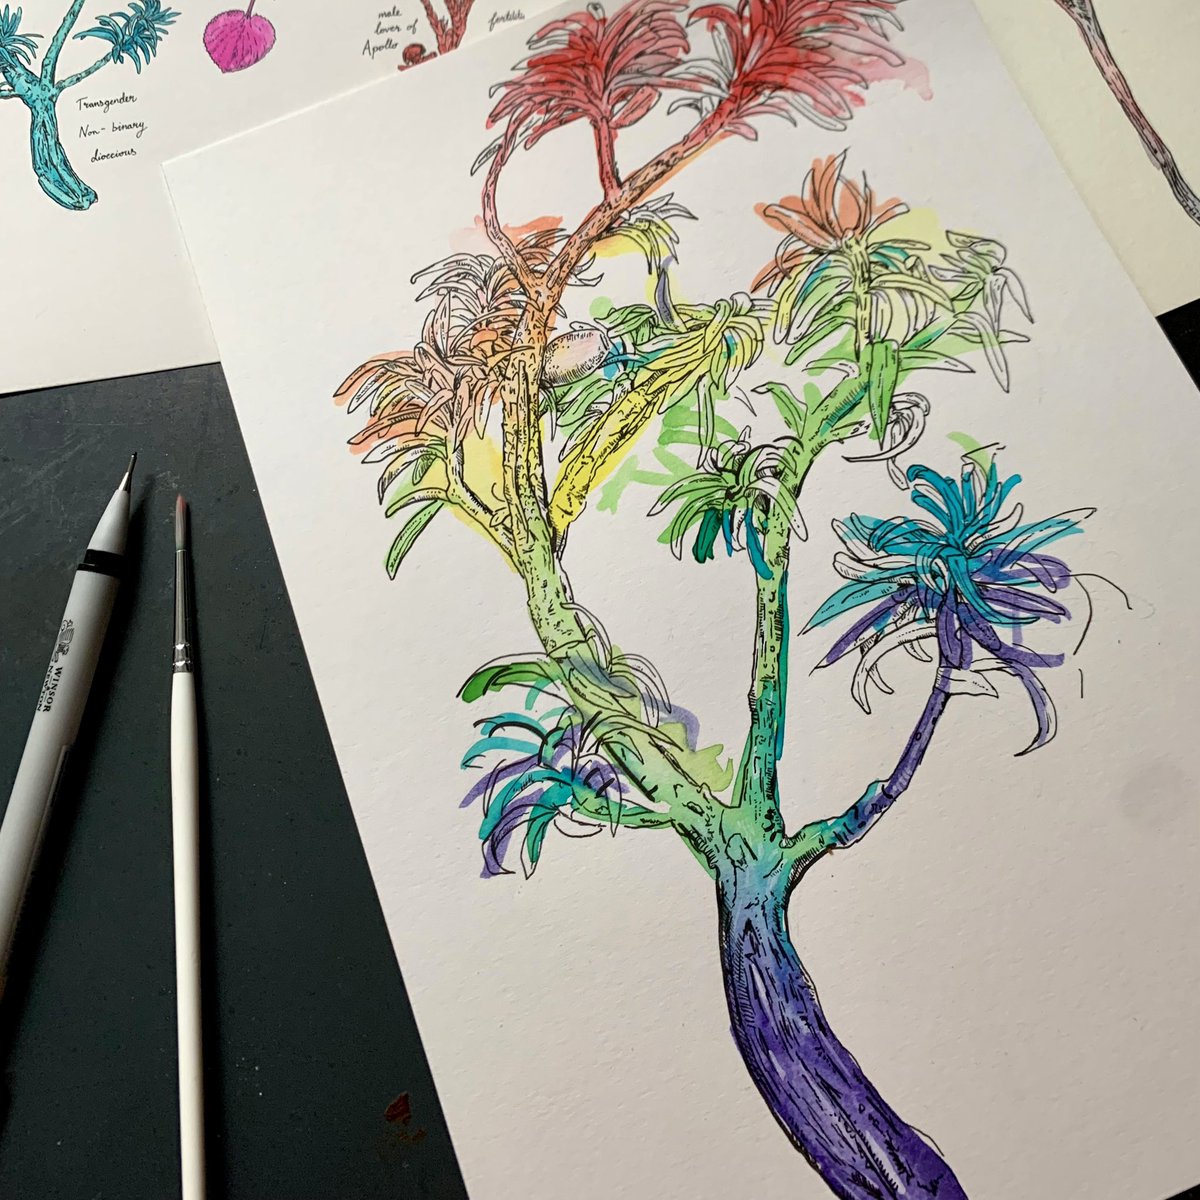 🌿 Healing Gardens of Bab: Queer Botanical Drawing
📍 Selfridges Birmingham
🗓️ Saturday July 2
🕑 2pm-3:30pm & 4pm-5:30pm
🎟️ FREE bit.ly/QBDraw

Hosted w/EL Thrush. All skill levels welcome. Materials provided. 
@fiercefestival #HealingGardensOfBab #QueerBotany